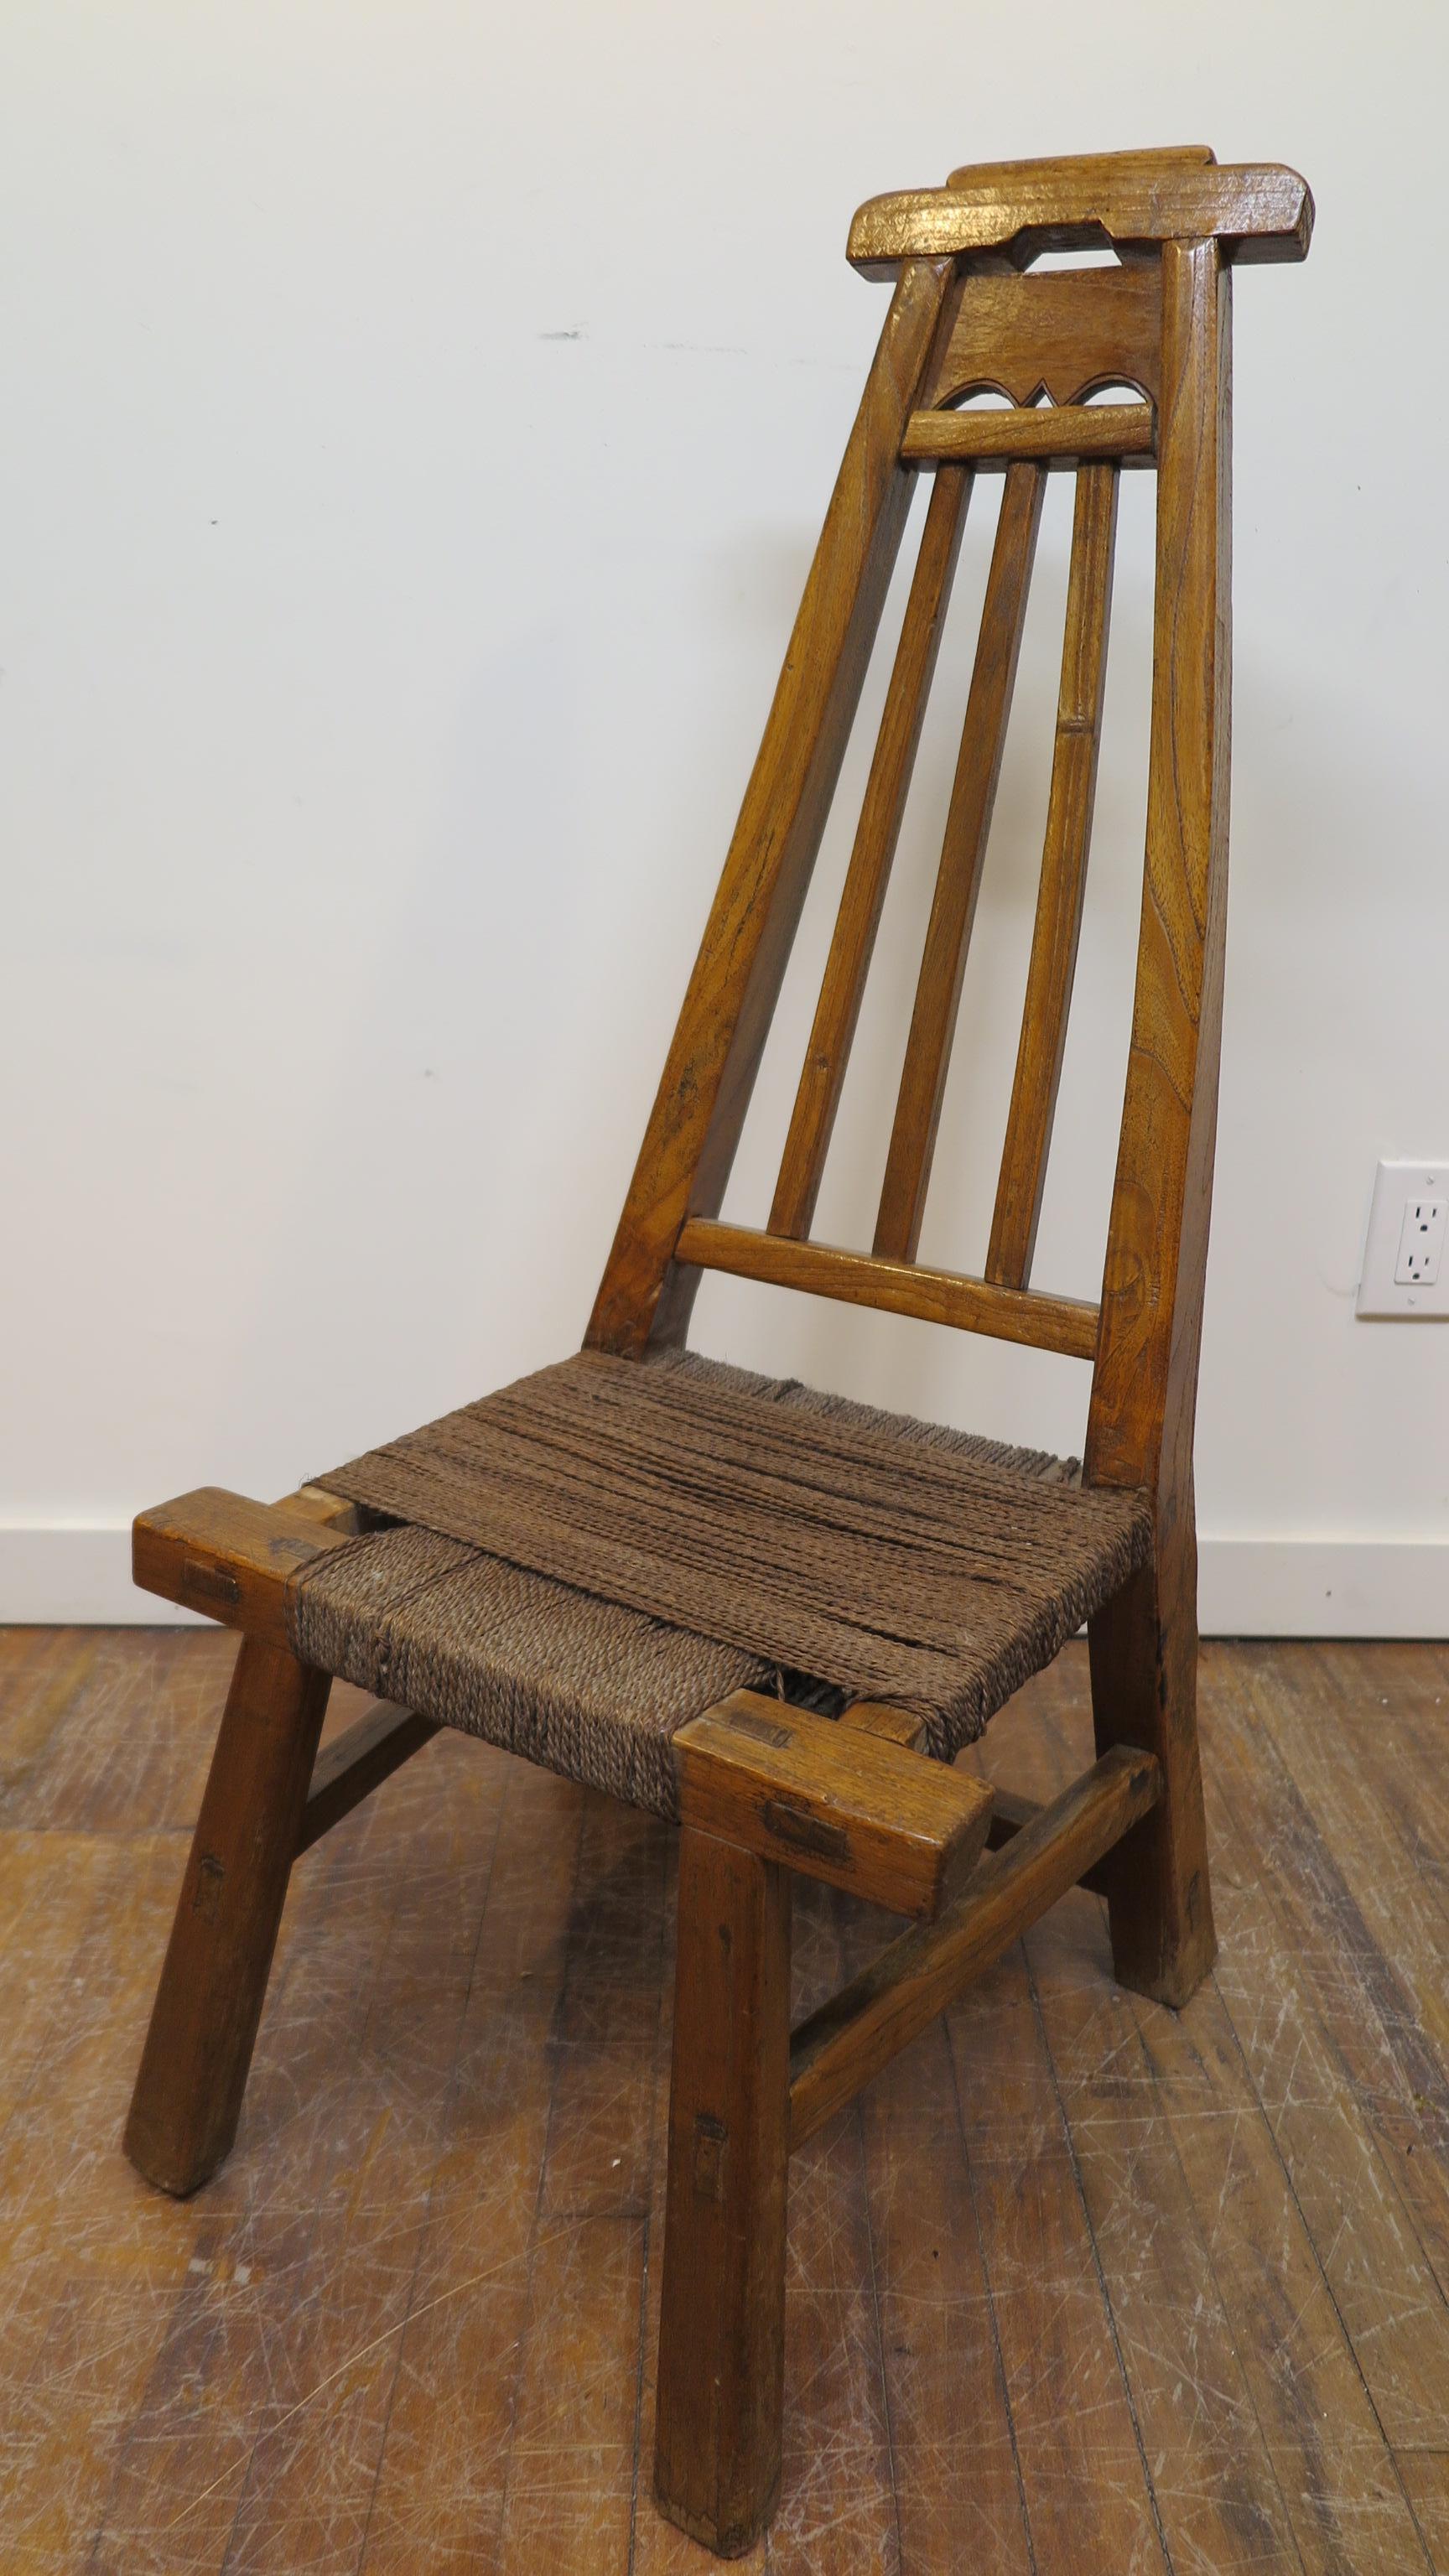 19th century Primitive fireside chair. Arched back with tall support this low chair is very comfortable. Made of hand hued hardwood and twine seat. Great for tight spaces or fireside. Measures: Seat height is 14.5 inches.